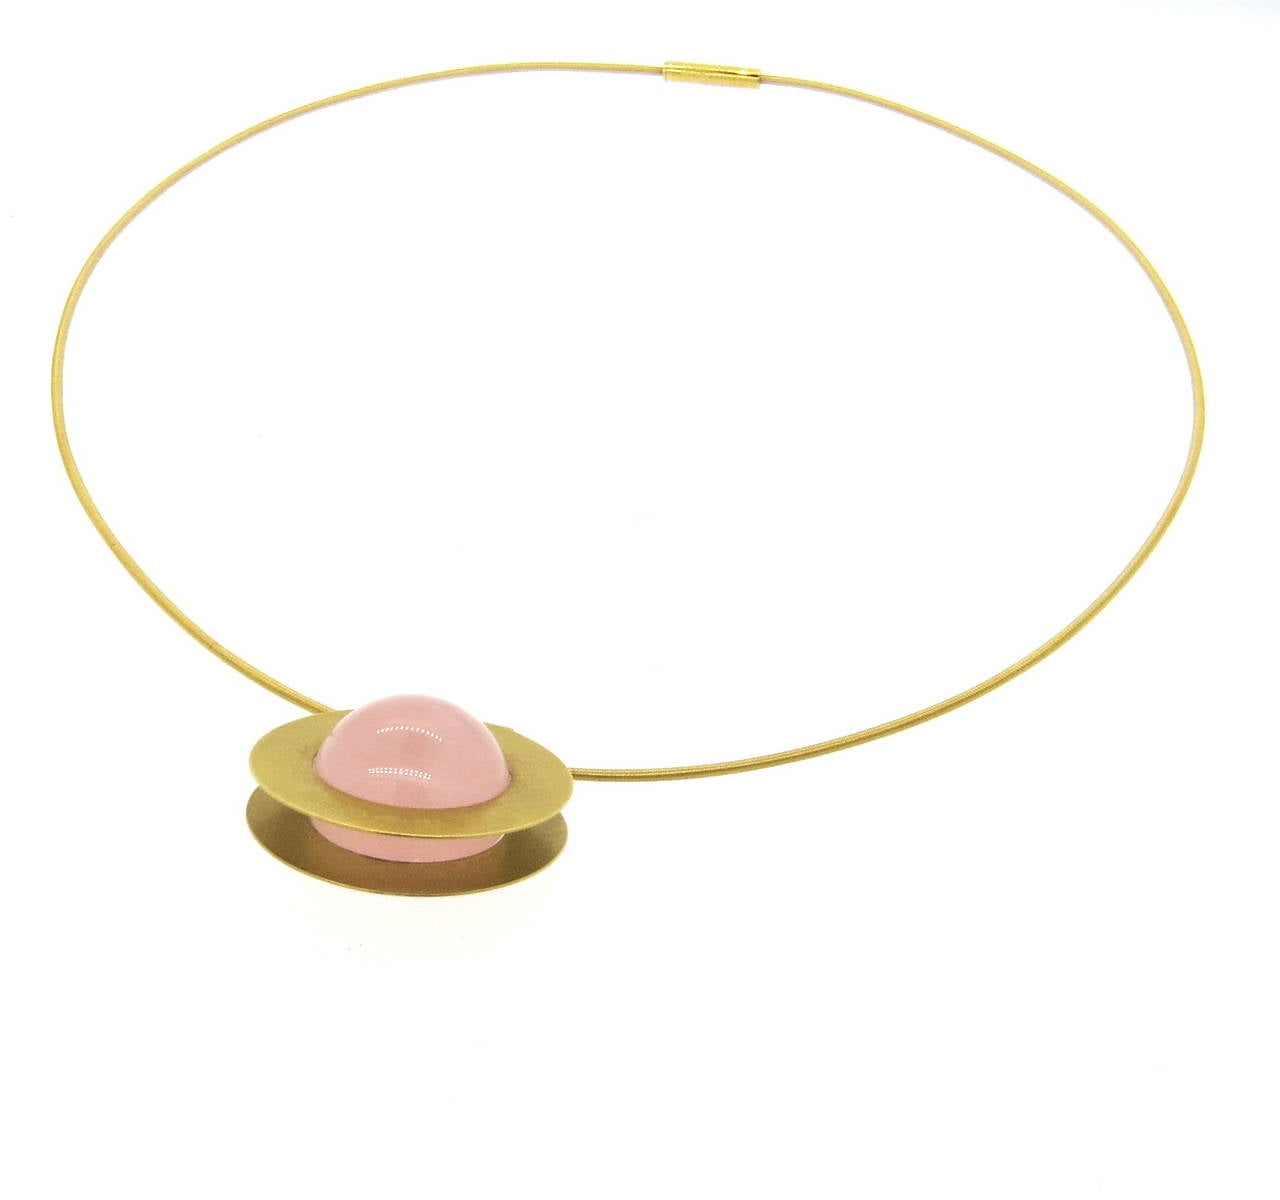 18k gold necklace by Niessing, featuring rose quartz pendant. Necklace is 17 1/2